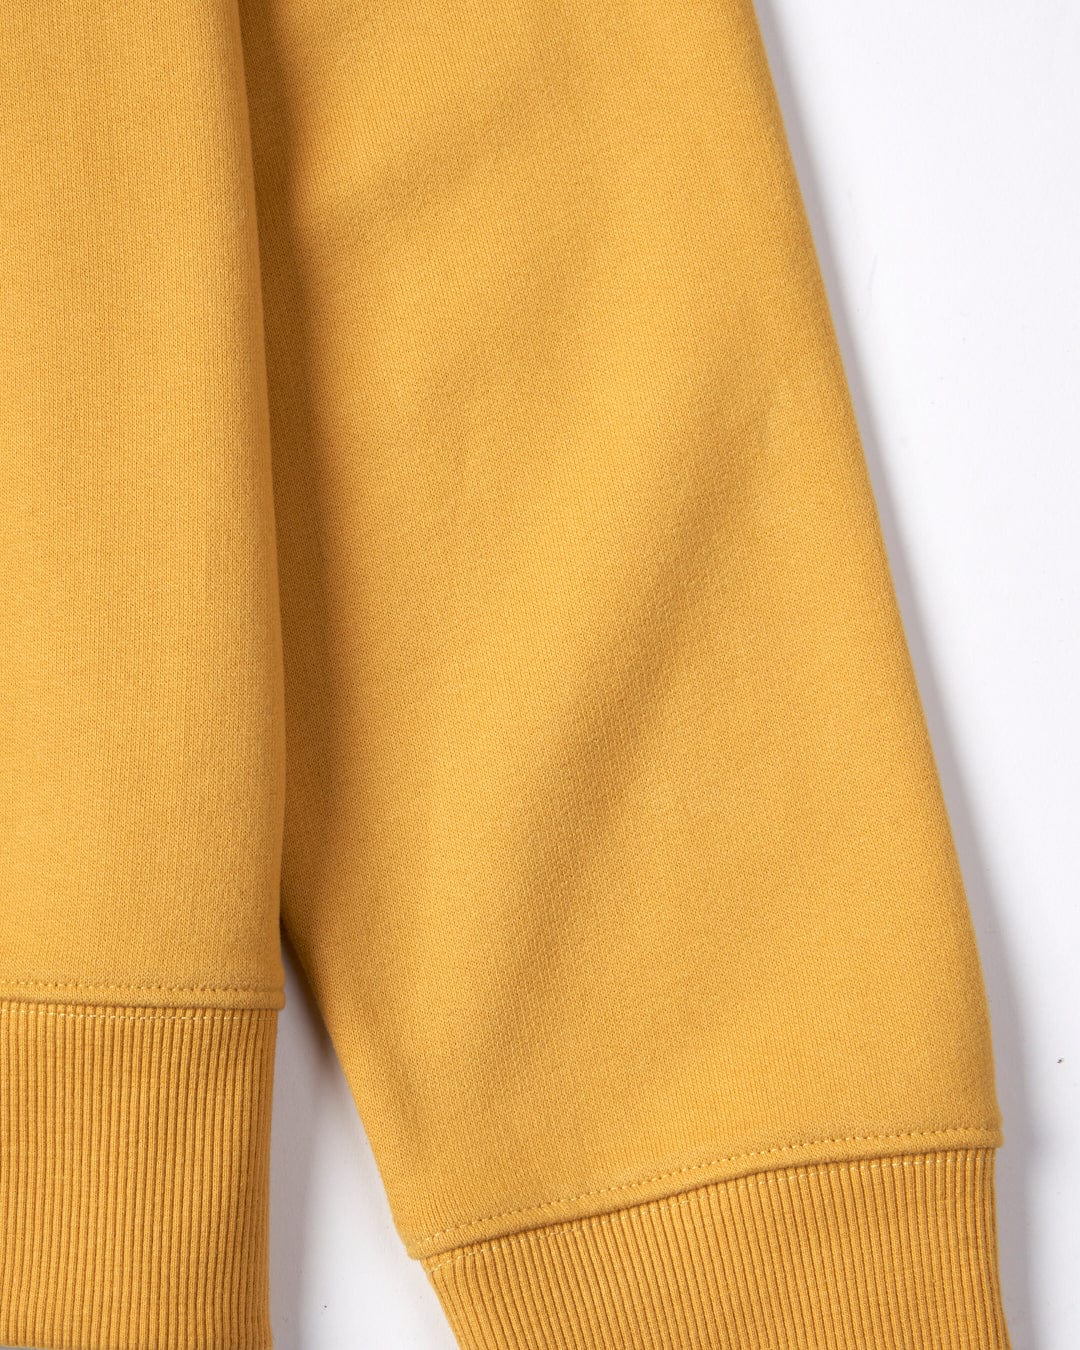 Close-up view of a Saltrock Velator - Womens Sweatshirt in Mustard Yellow with ribbed cuffs and a crew neckline on a white background.